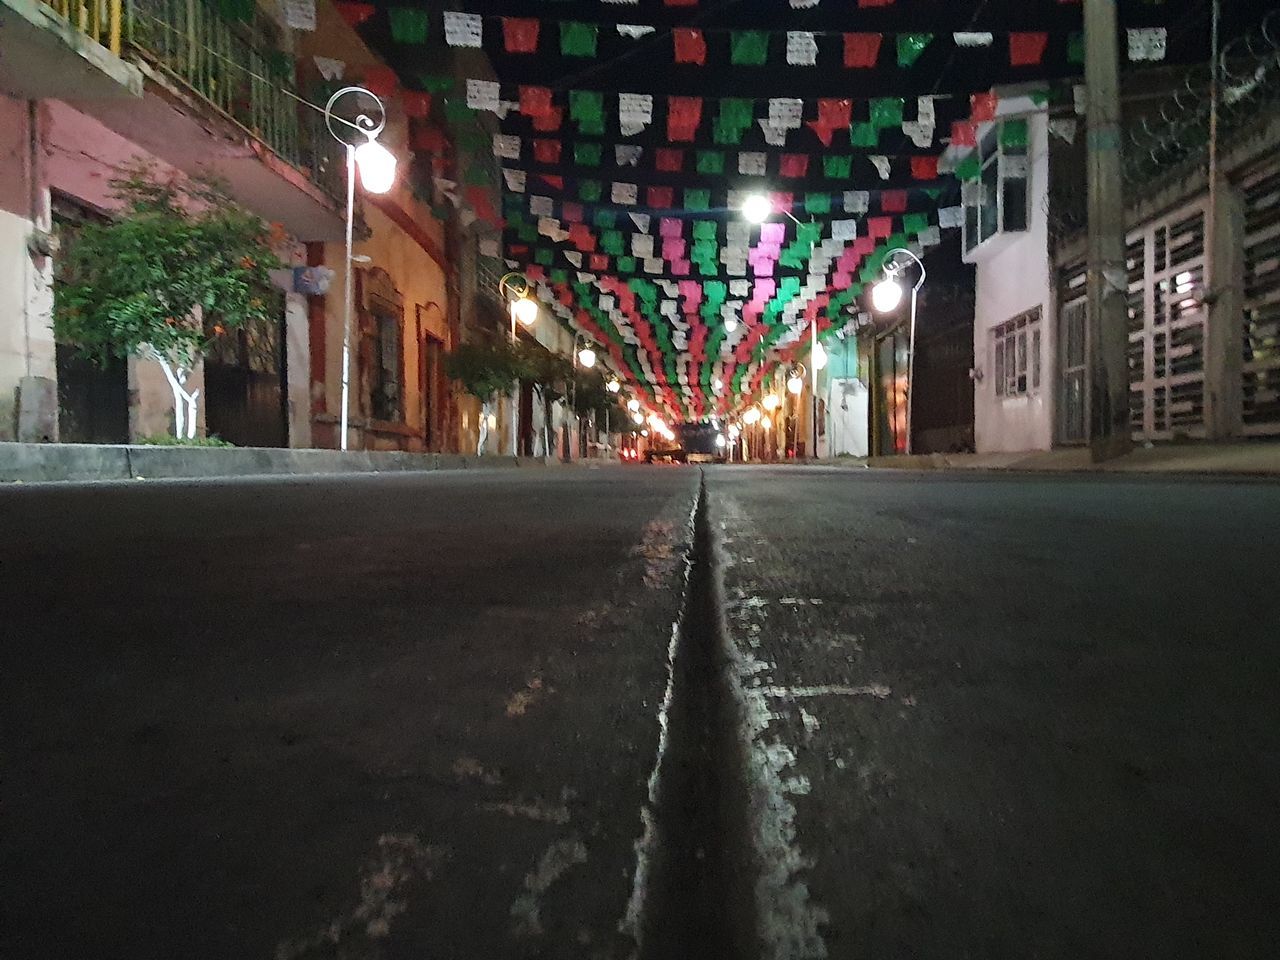 EMPTY ROAD AMIDST ILLUMINATED BUILDINGS IN CITY